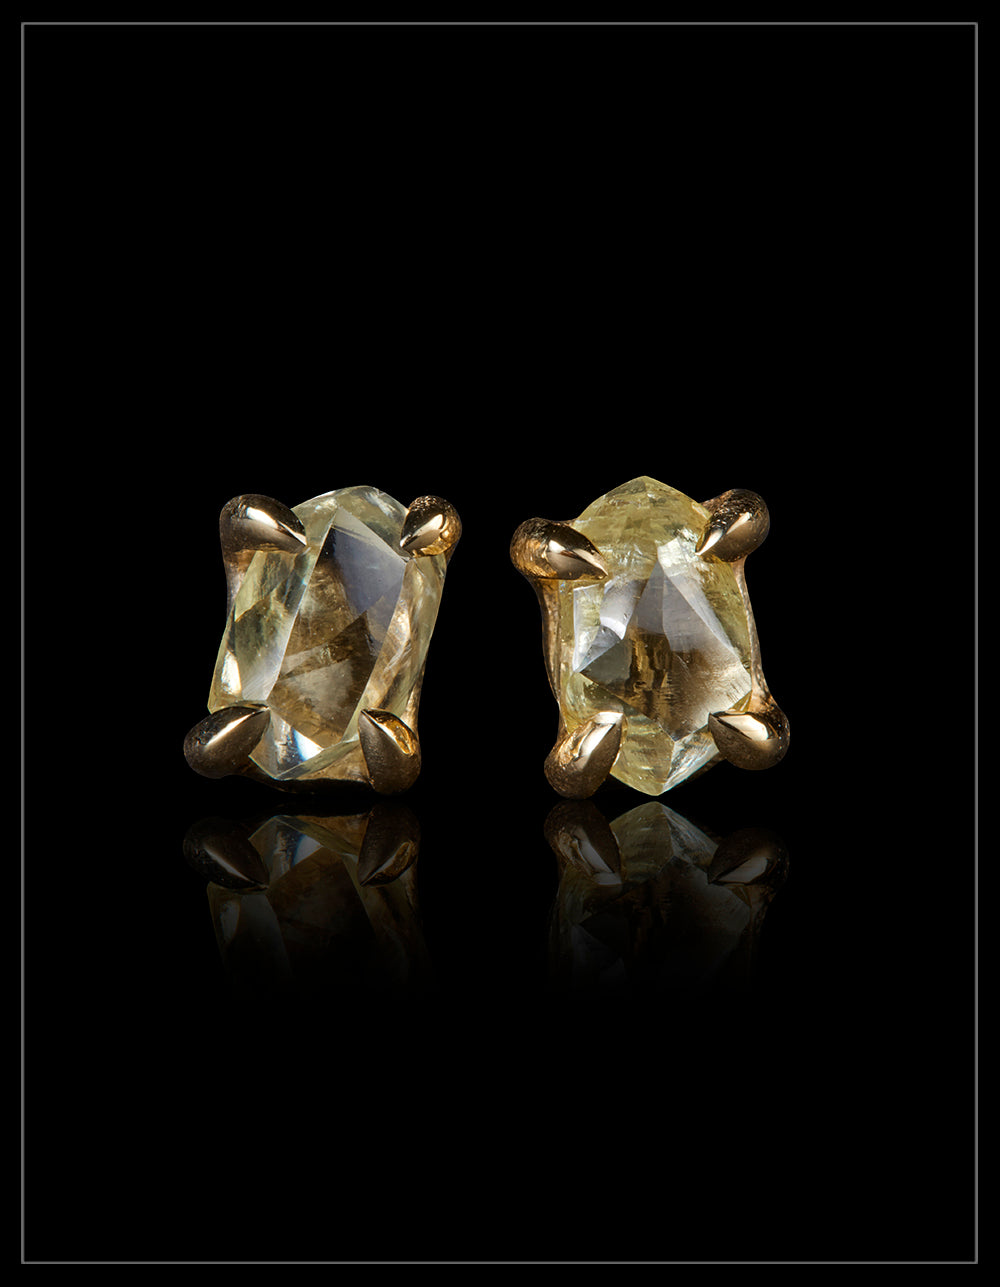 Sunrays from South Africa in Gold Earrings – 1.07 ct.